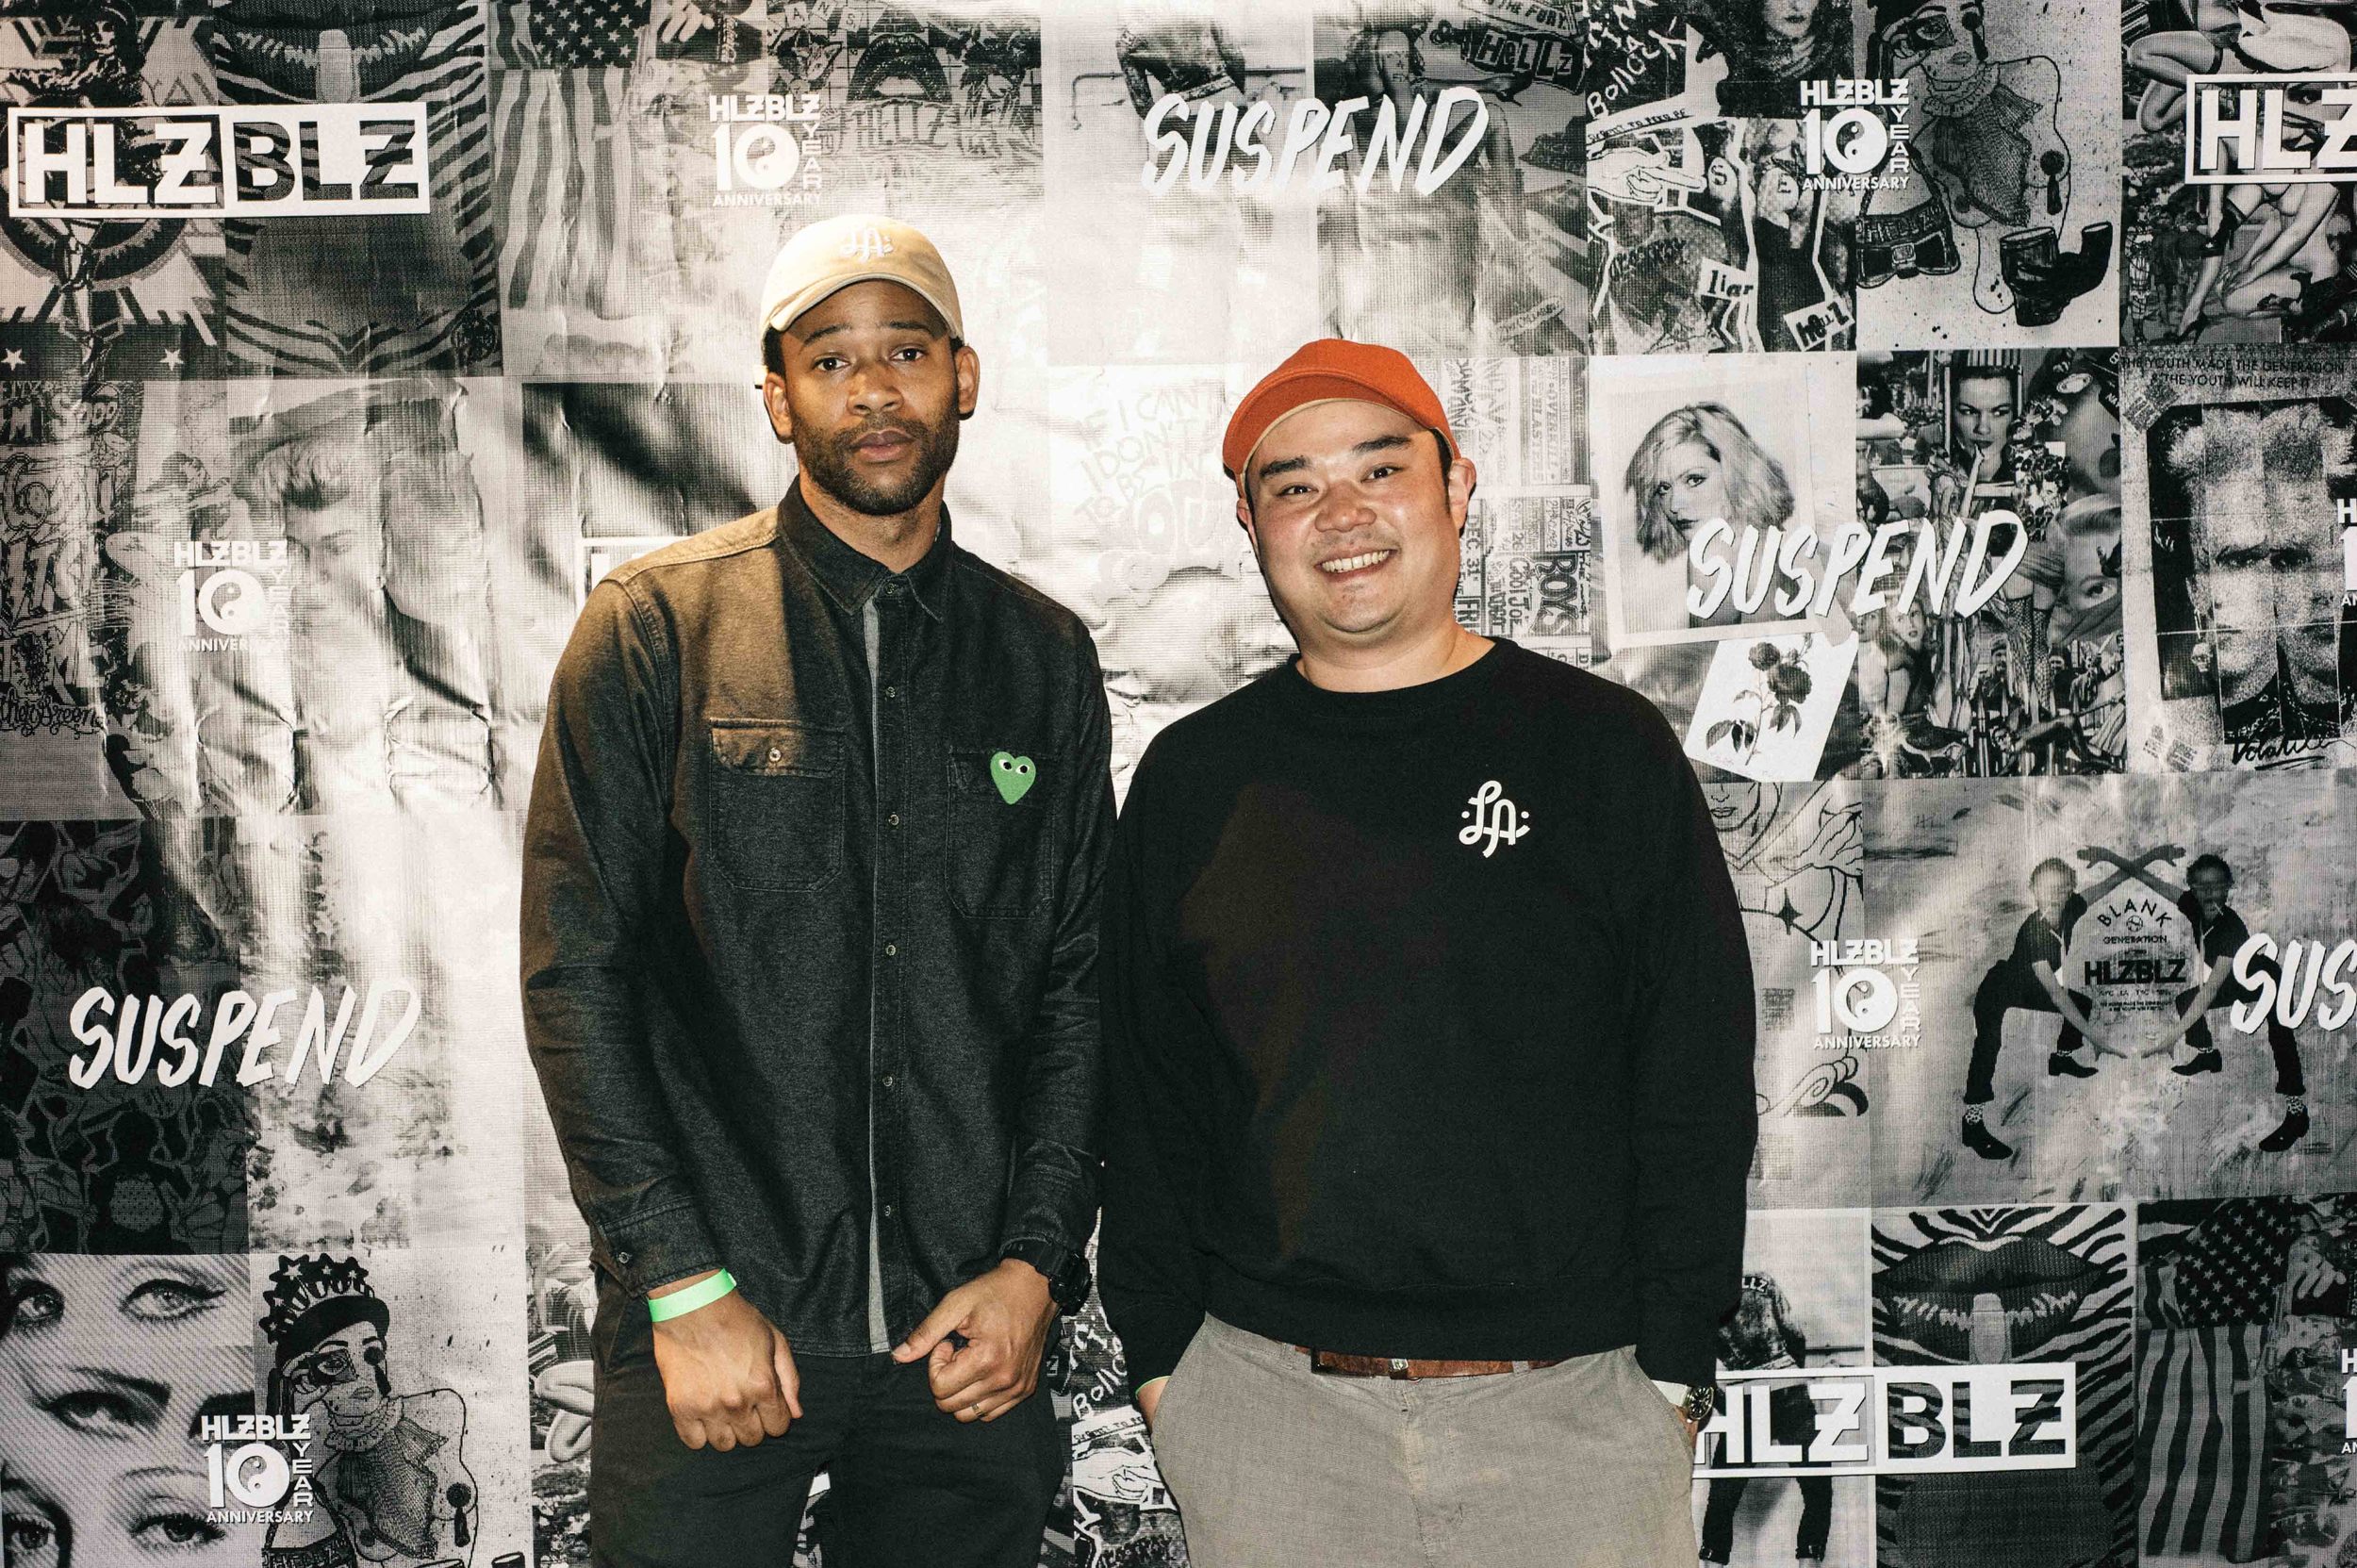  Joel and Steve of Small Shop LA at the ISSUE 06 Launch x HLZBLZ 10Year Anniversary (Feb 11) at Globe Theater. / Photo: © Jordan Abapo for SUSPEND Magazine 